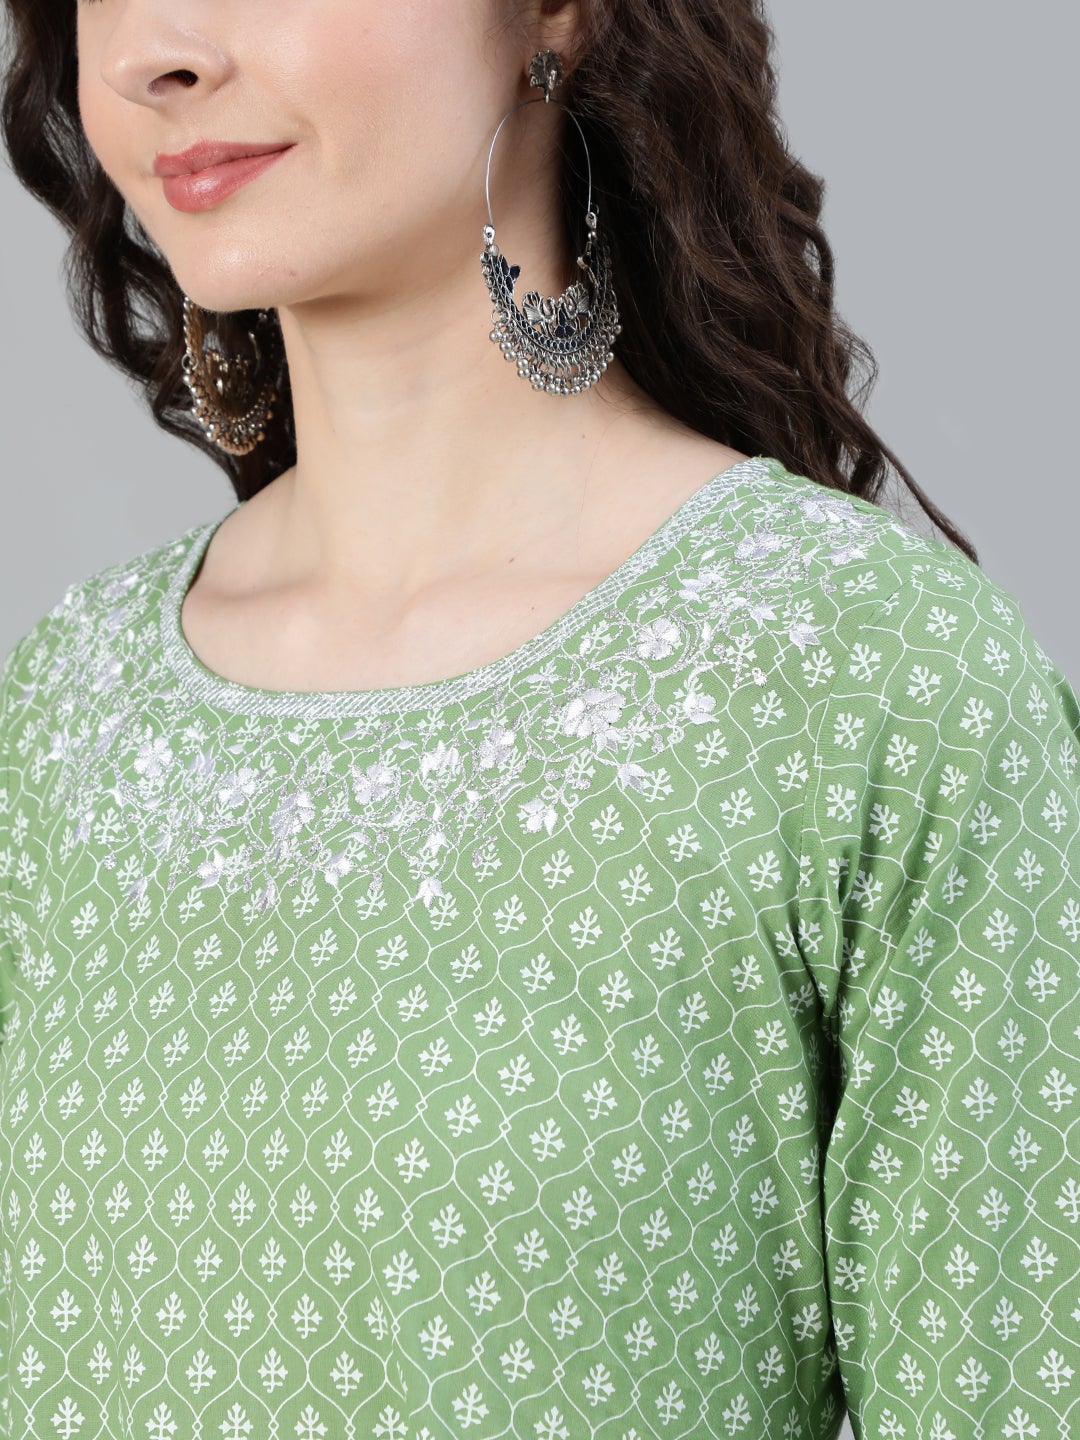 Green Printed Anarkali with Embroidered Yoke